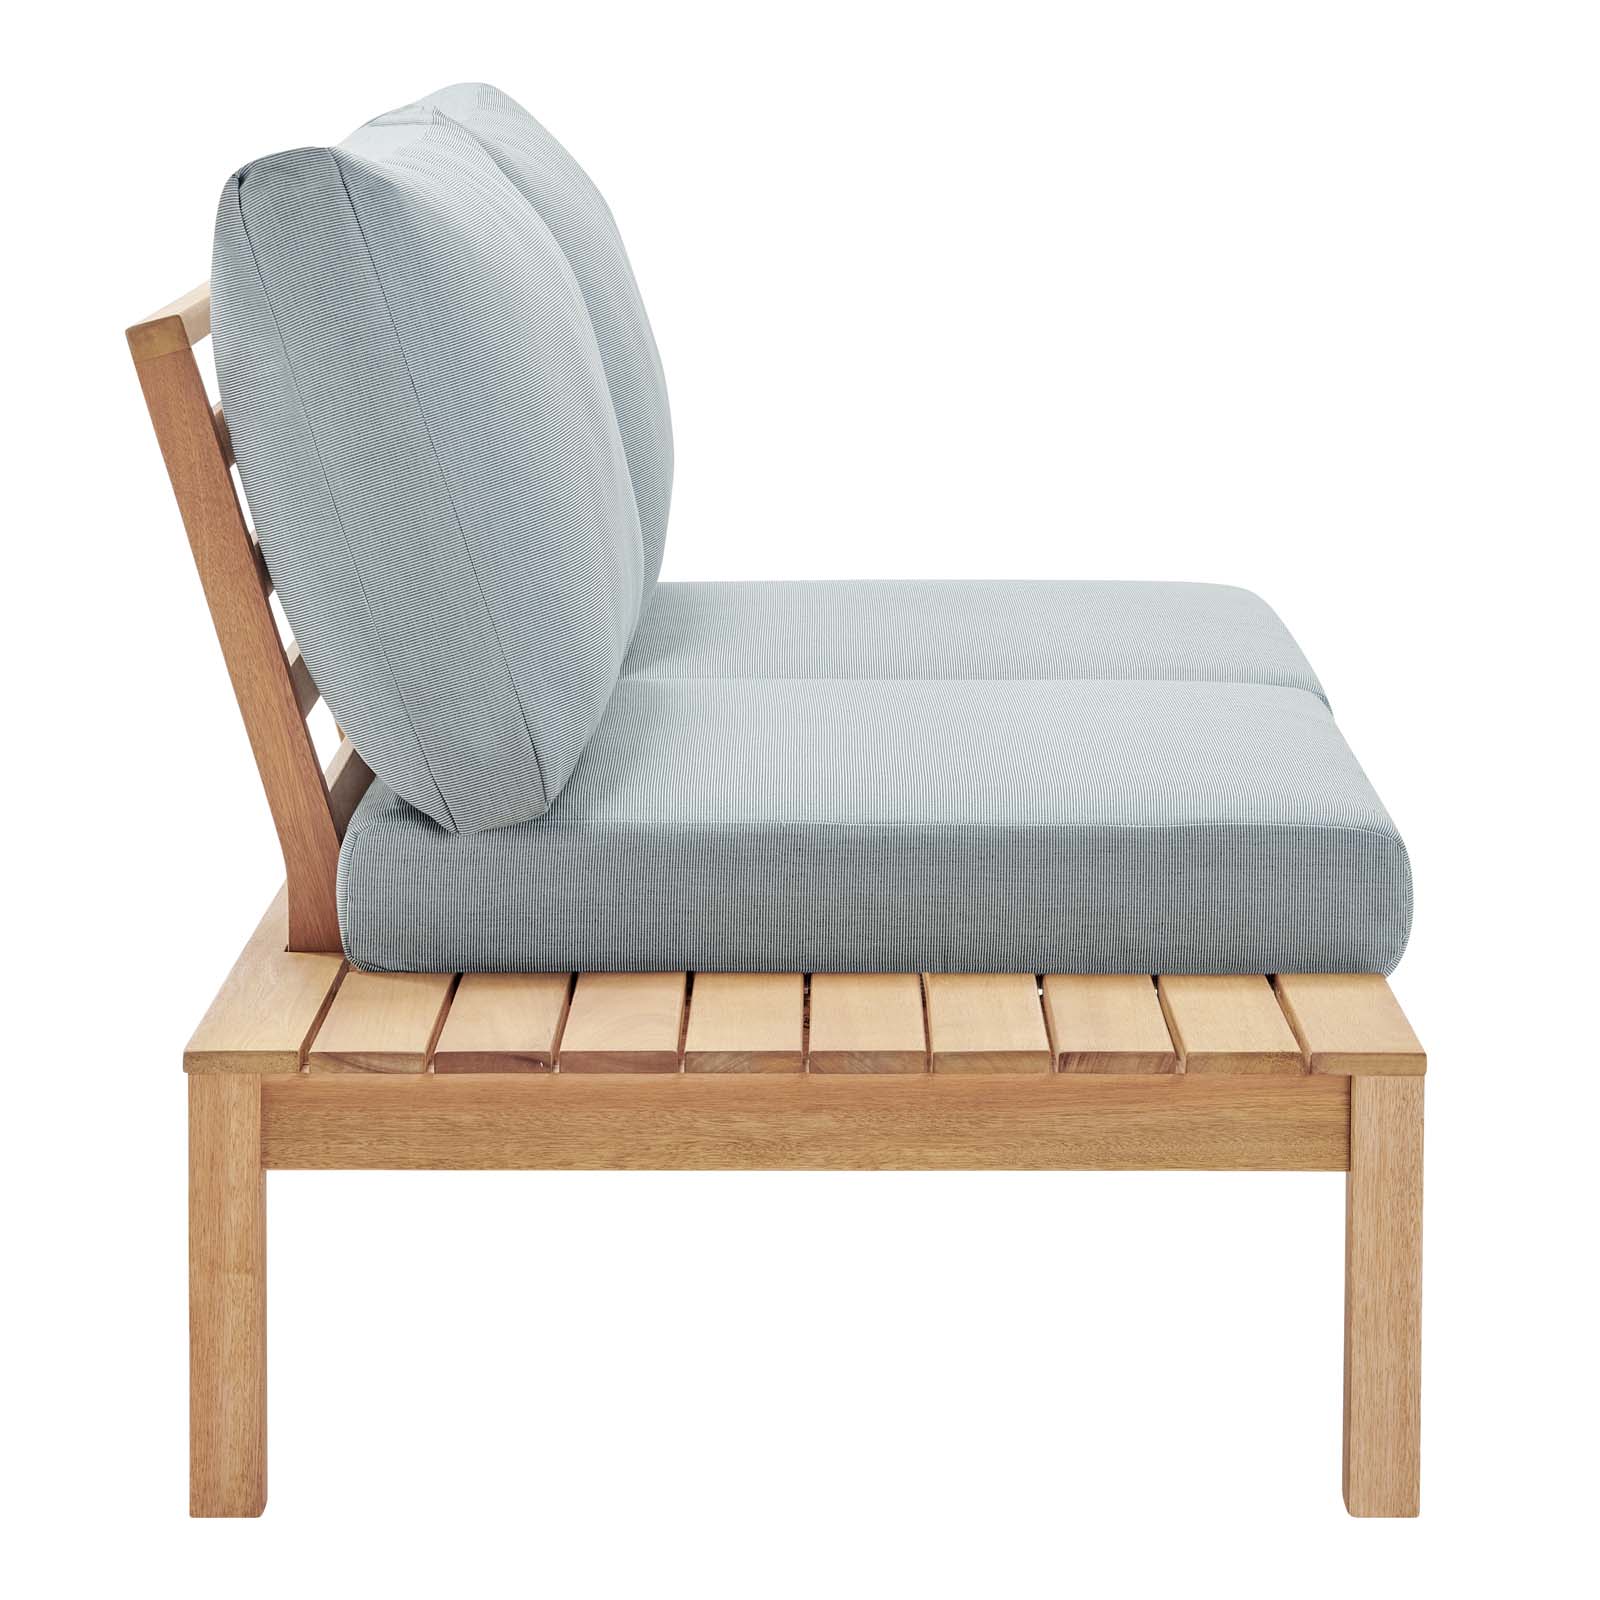 Modway Freeport Karri Wood Outdoor Patio Loveseat with Left-Facing Side End Table in Natural Light Blue - image 4 of 5